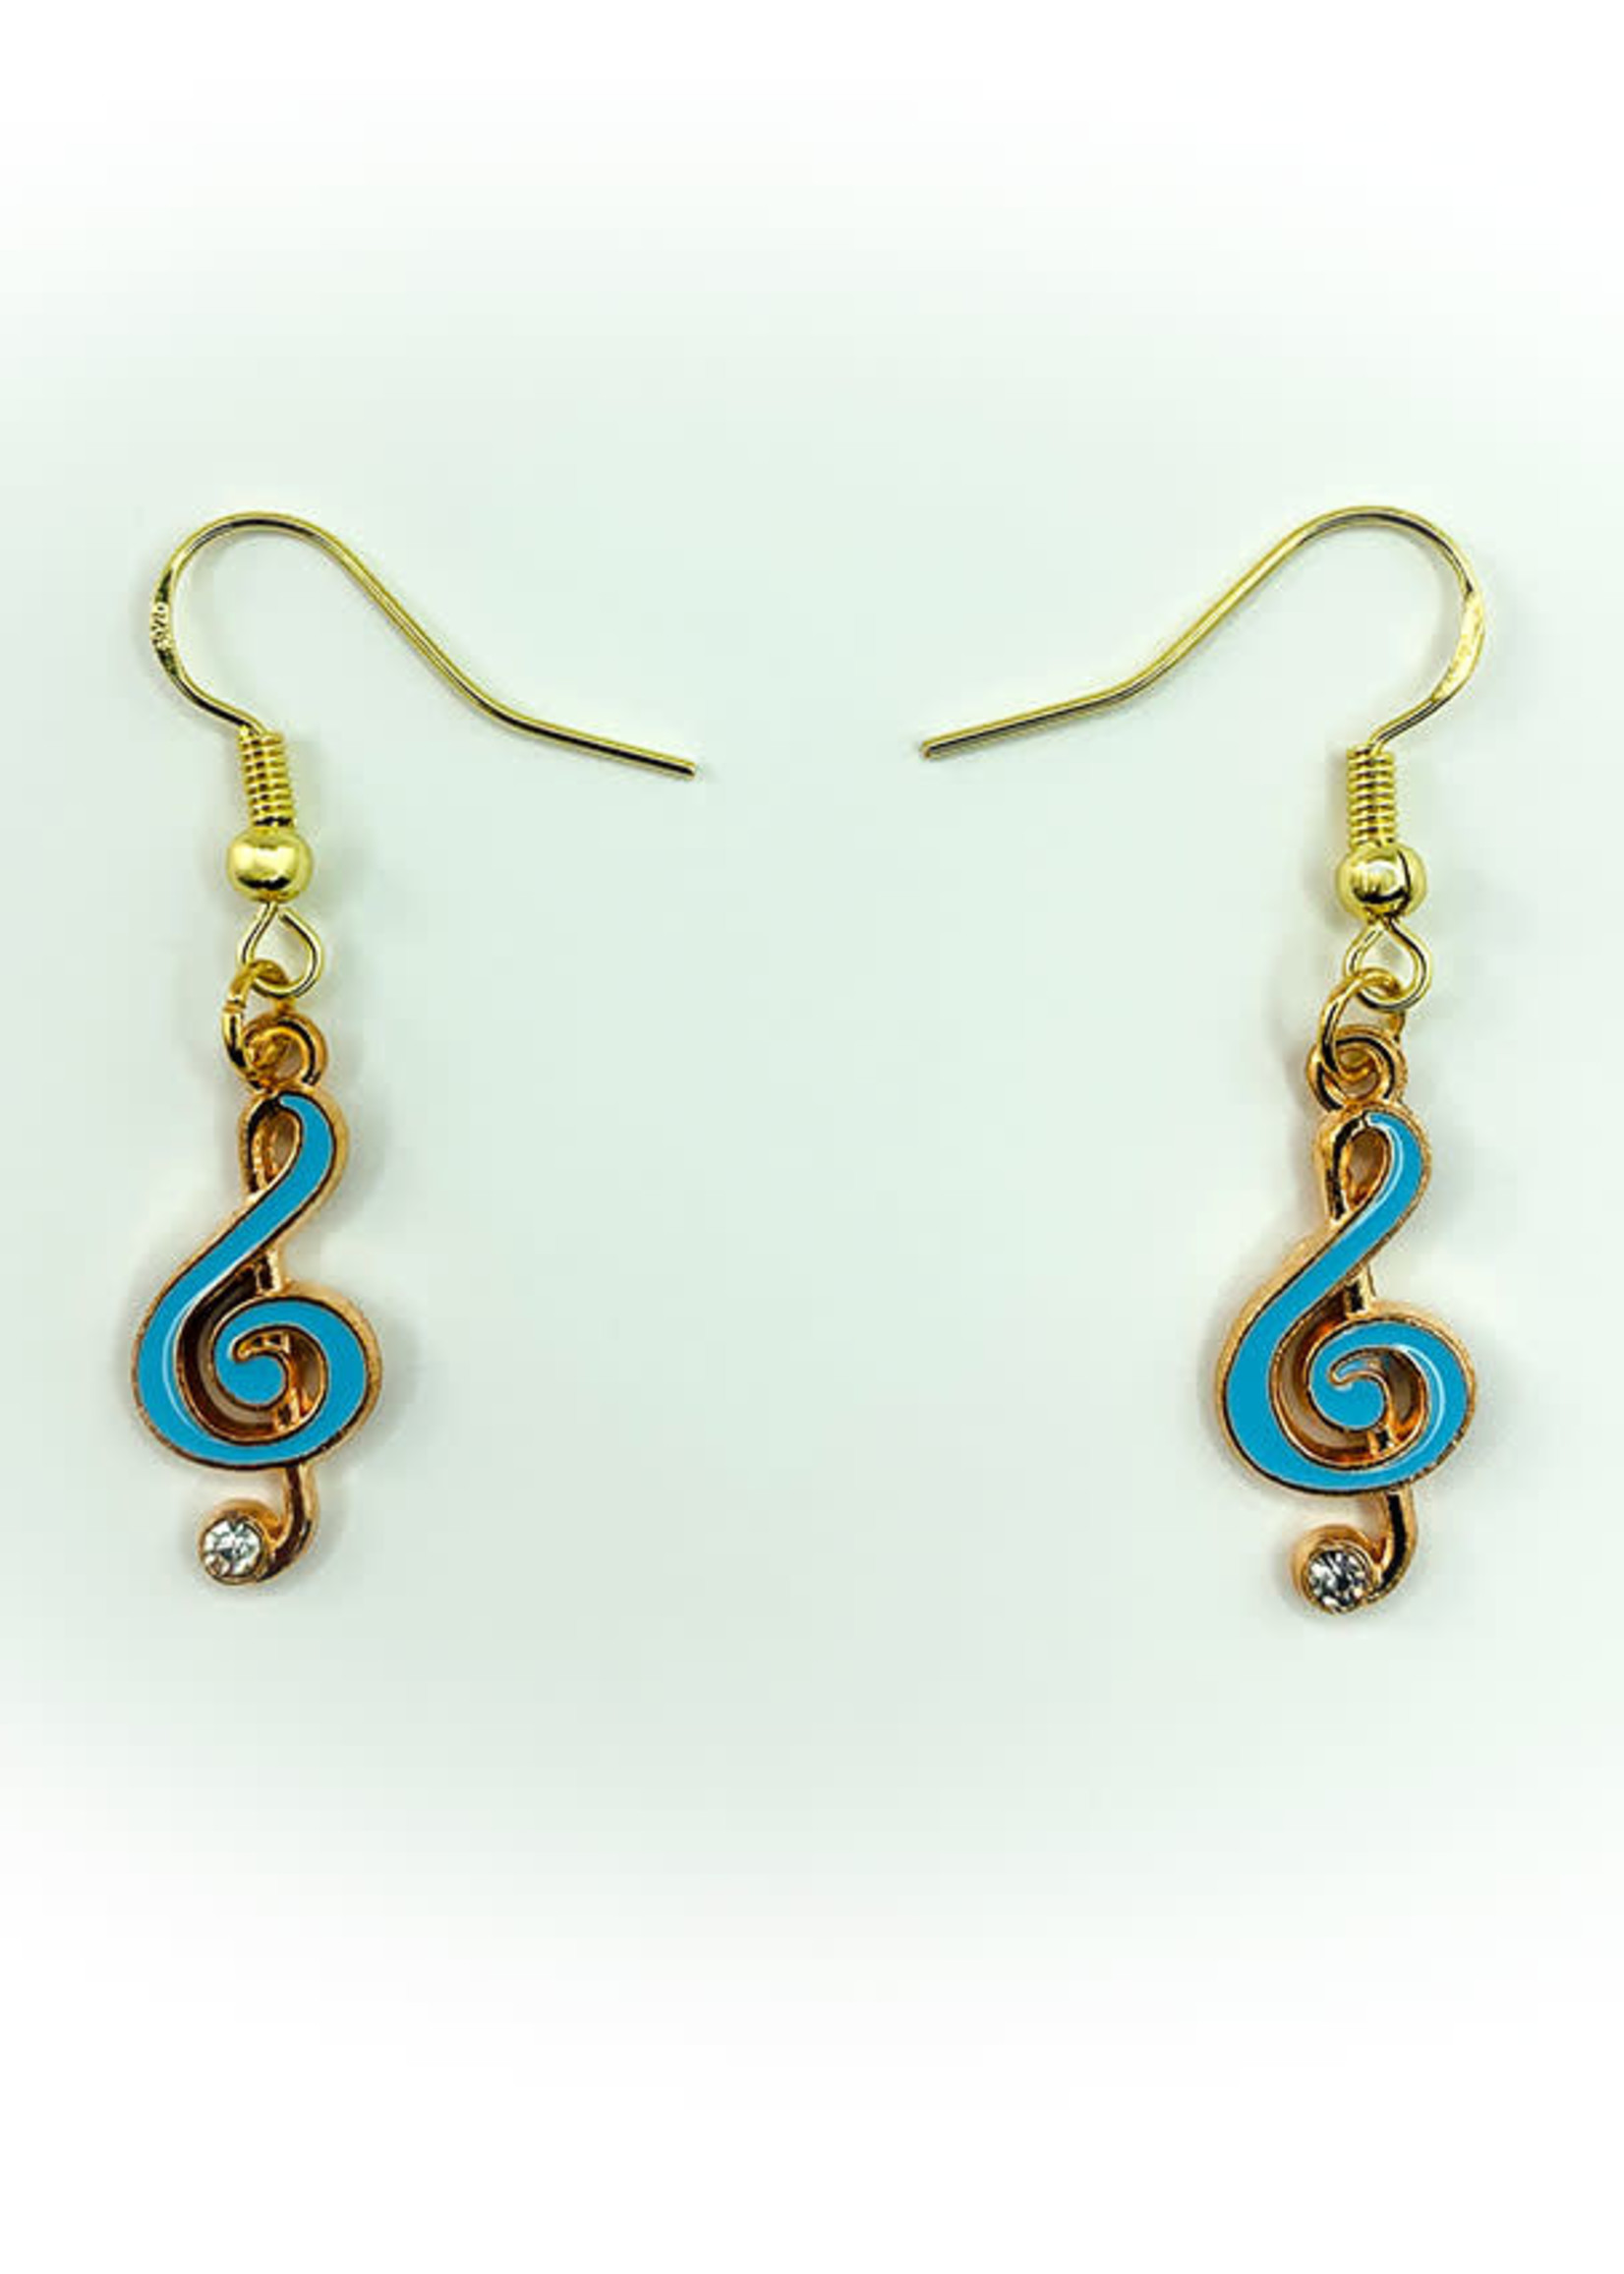 Earrings Blue Music Note with Jewel